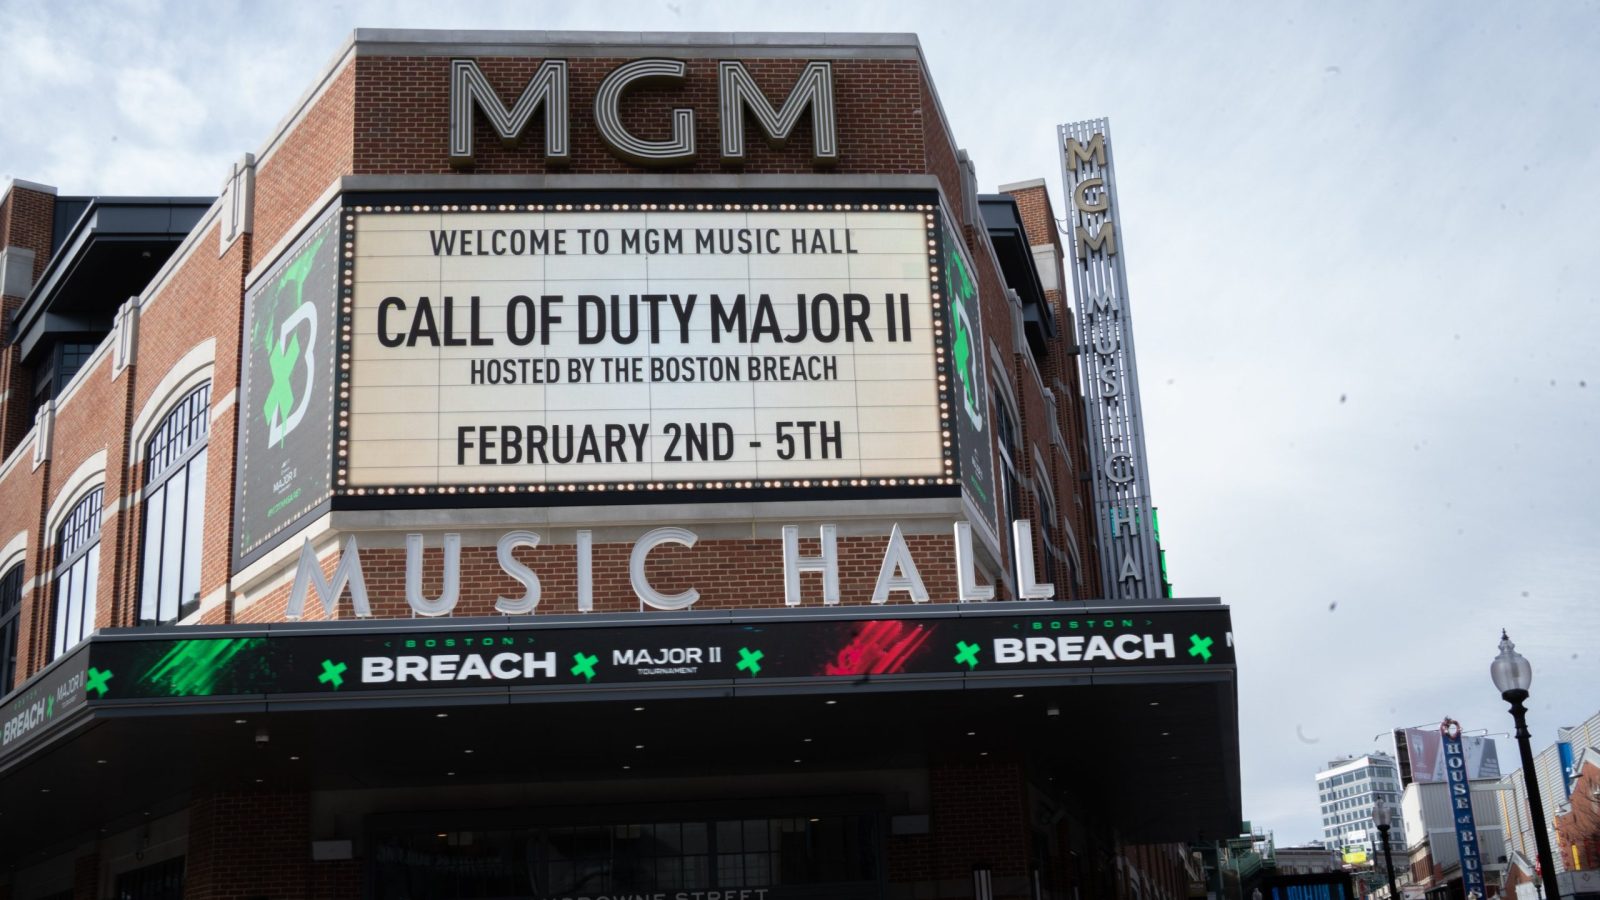 Major II of the Call of Duty League starts now! — GAMINGTREND